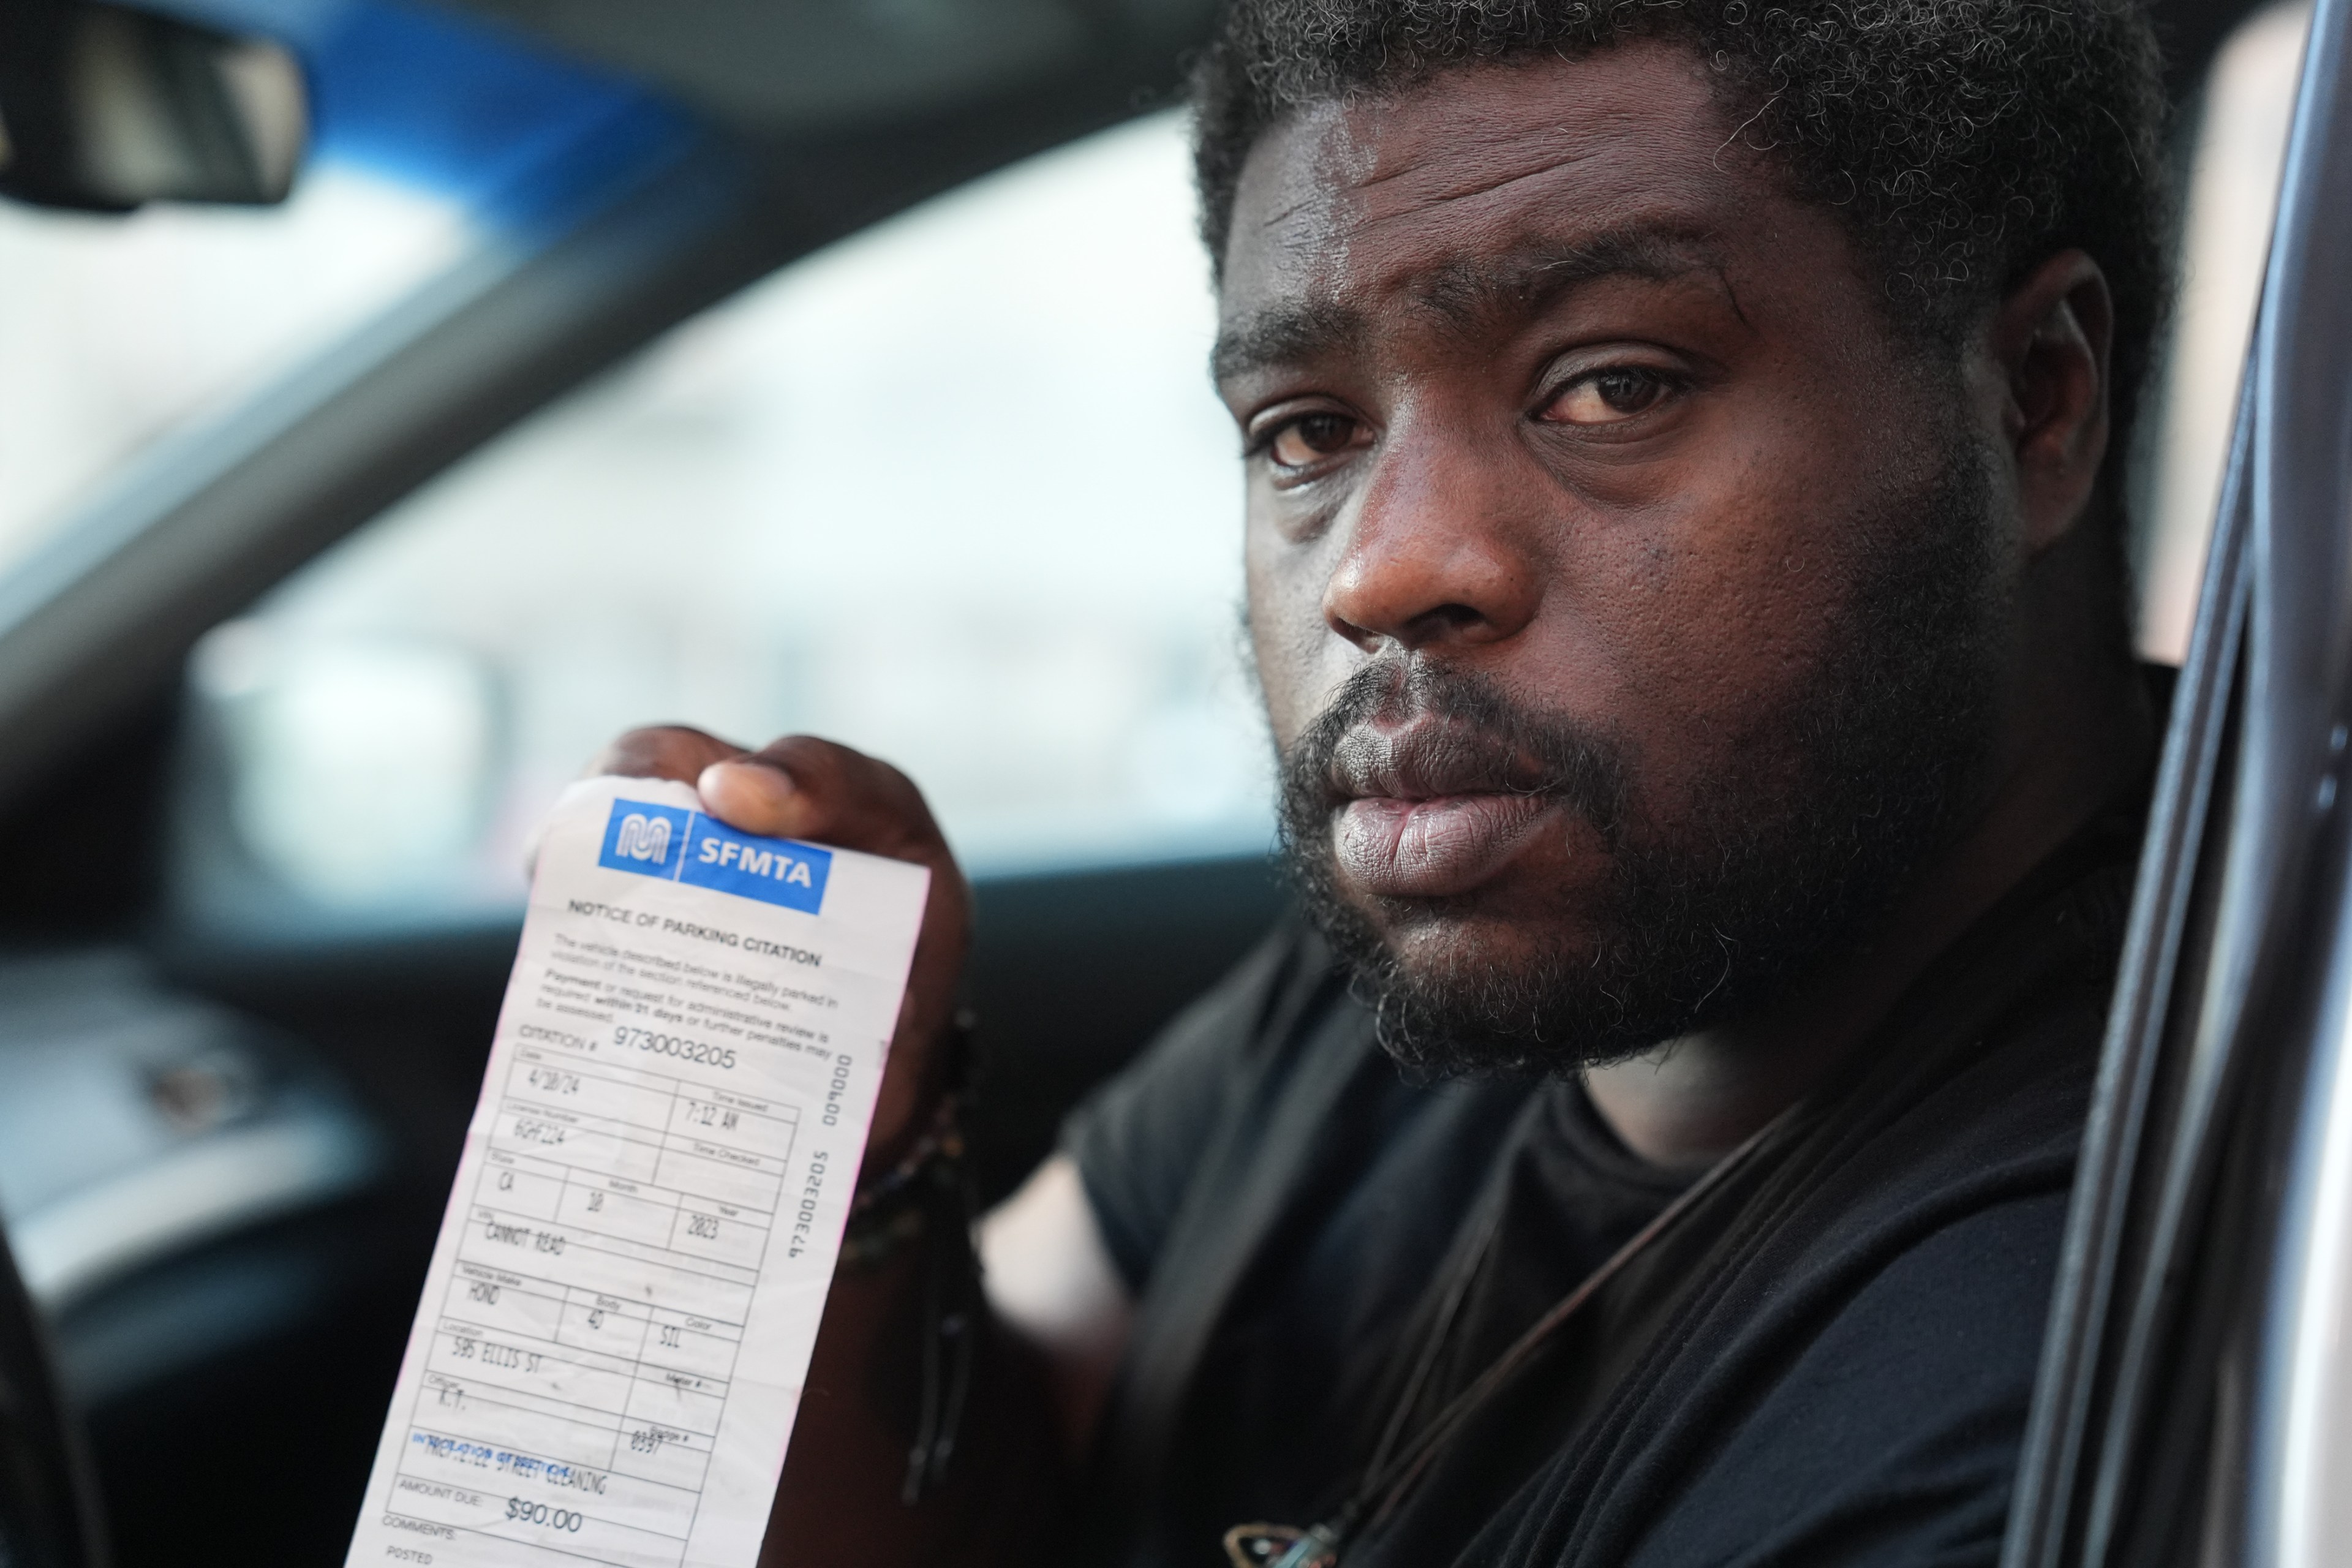 A man in a car, looking frustrated, holds up a parking citation.